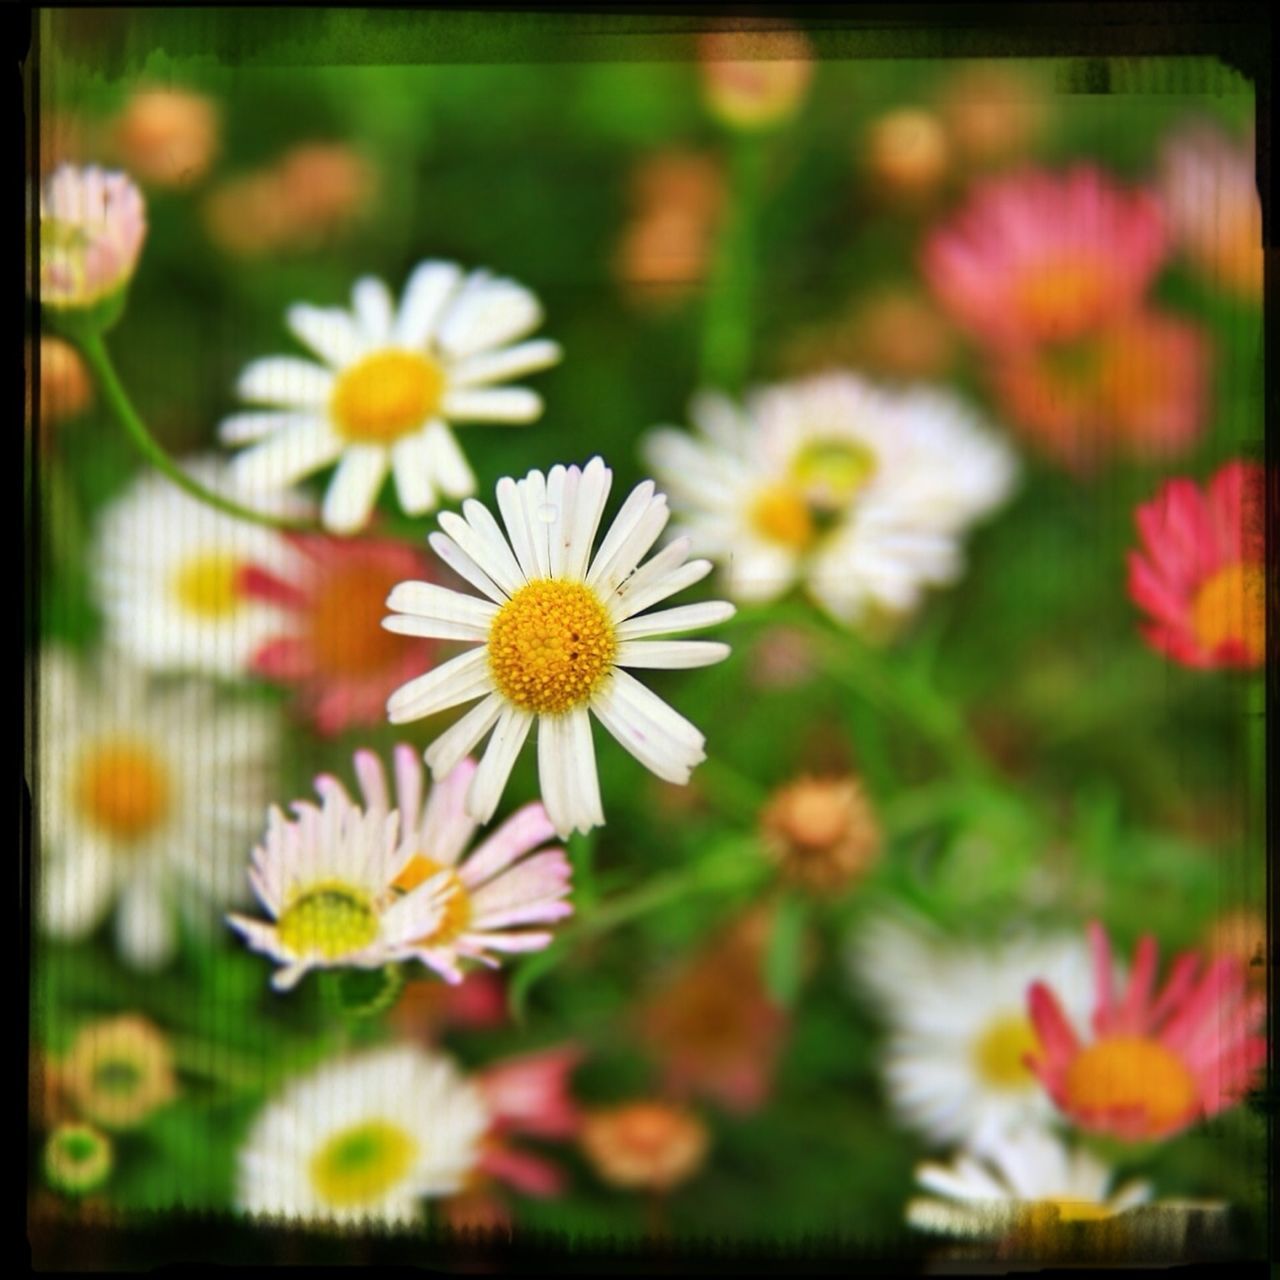 flower, freshness, petal, transfer print, fragility, flower head, growth, beauty in nature, auto post production filter, blooming, nature, white color, daisy, focus on foreground, pollen, close-up, selective focus, in bloom, blossom, plant